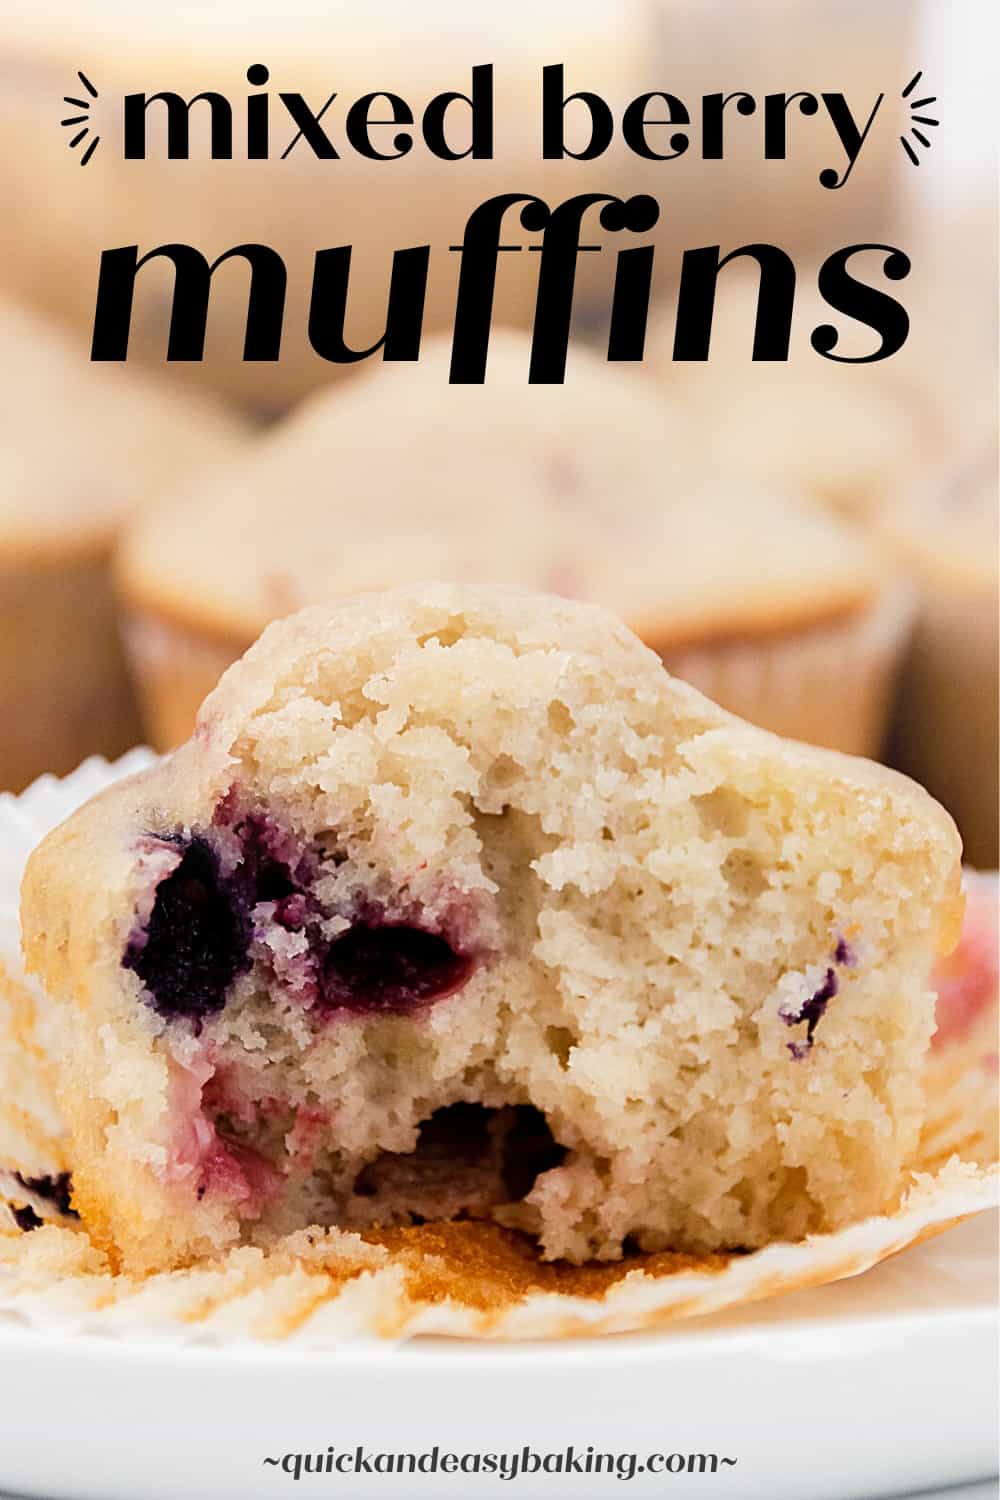 Pinterest image with a mixed berry muffin cut on a white plate with text overlay.